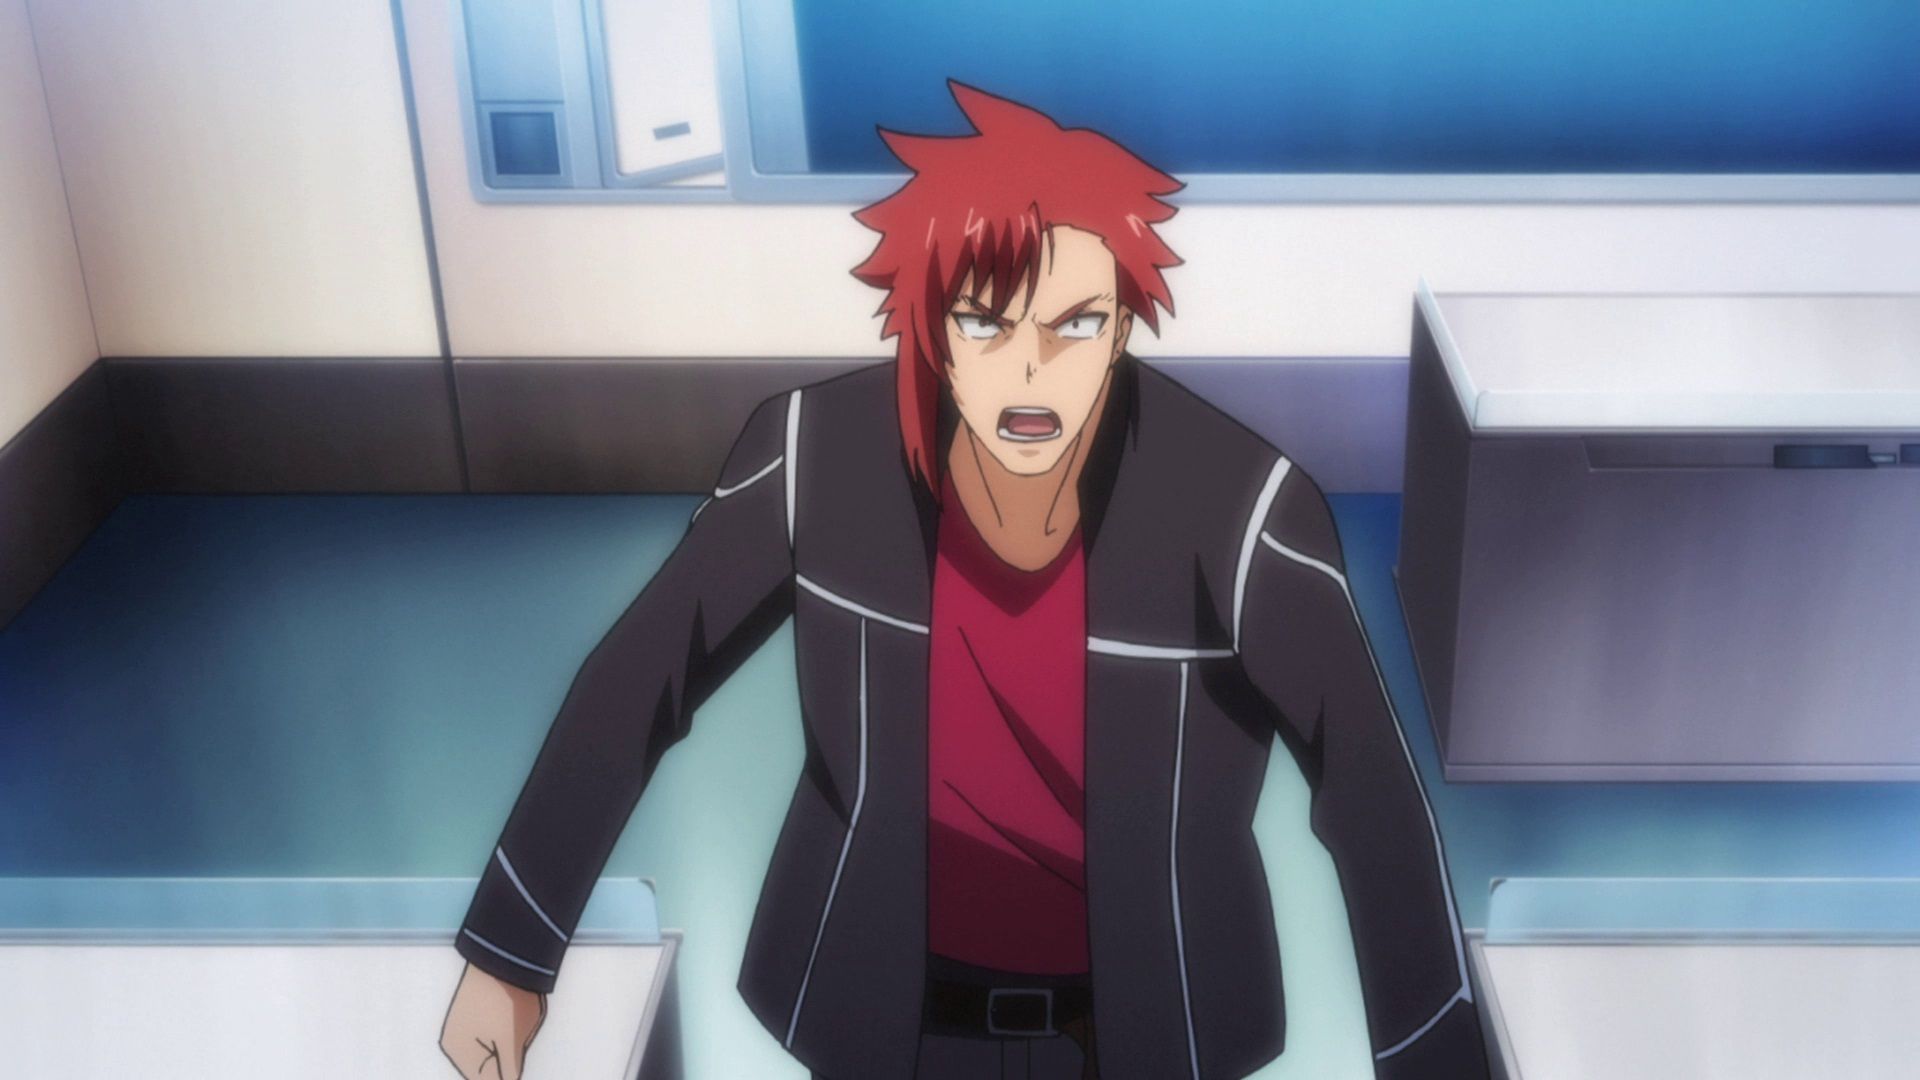 A red-haired man with a red shirt and black jacket, looking angry - Aesthetica of a Rogue Hero